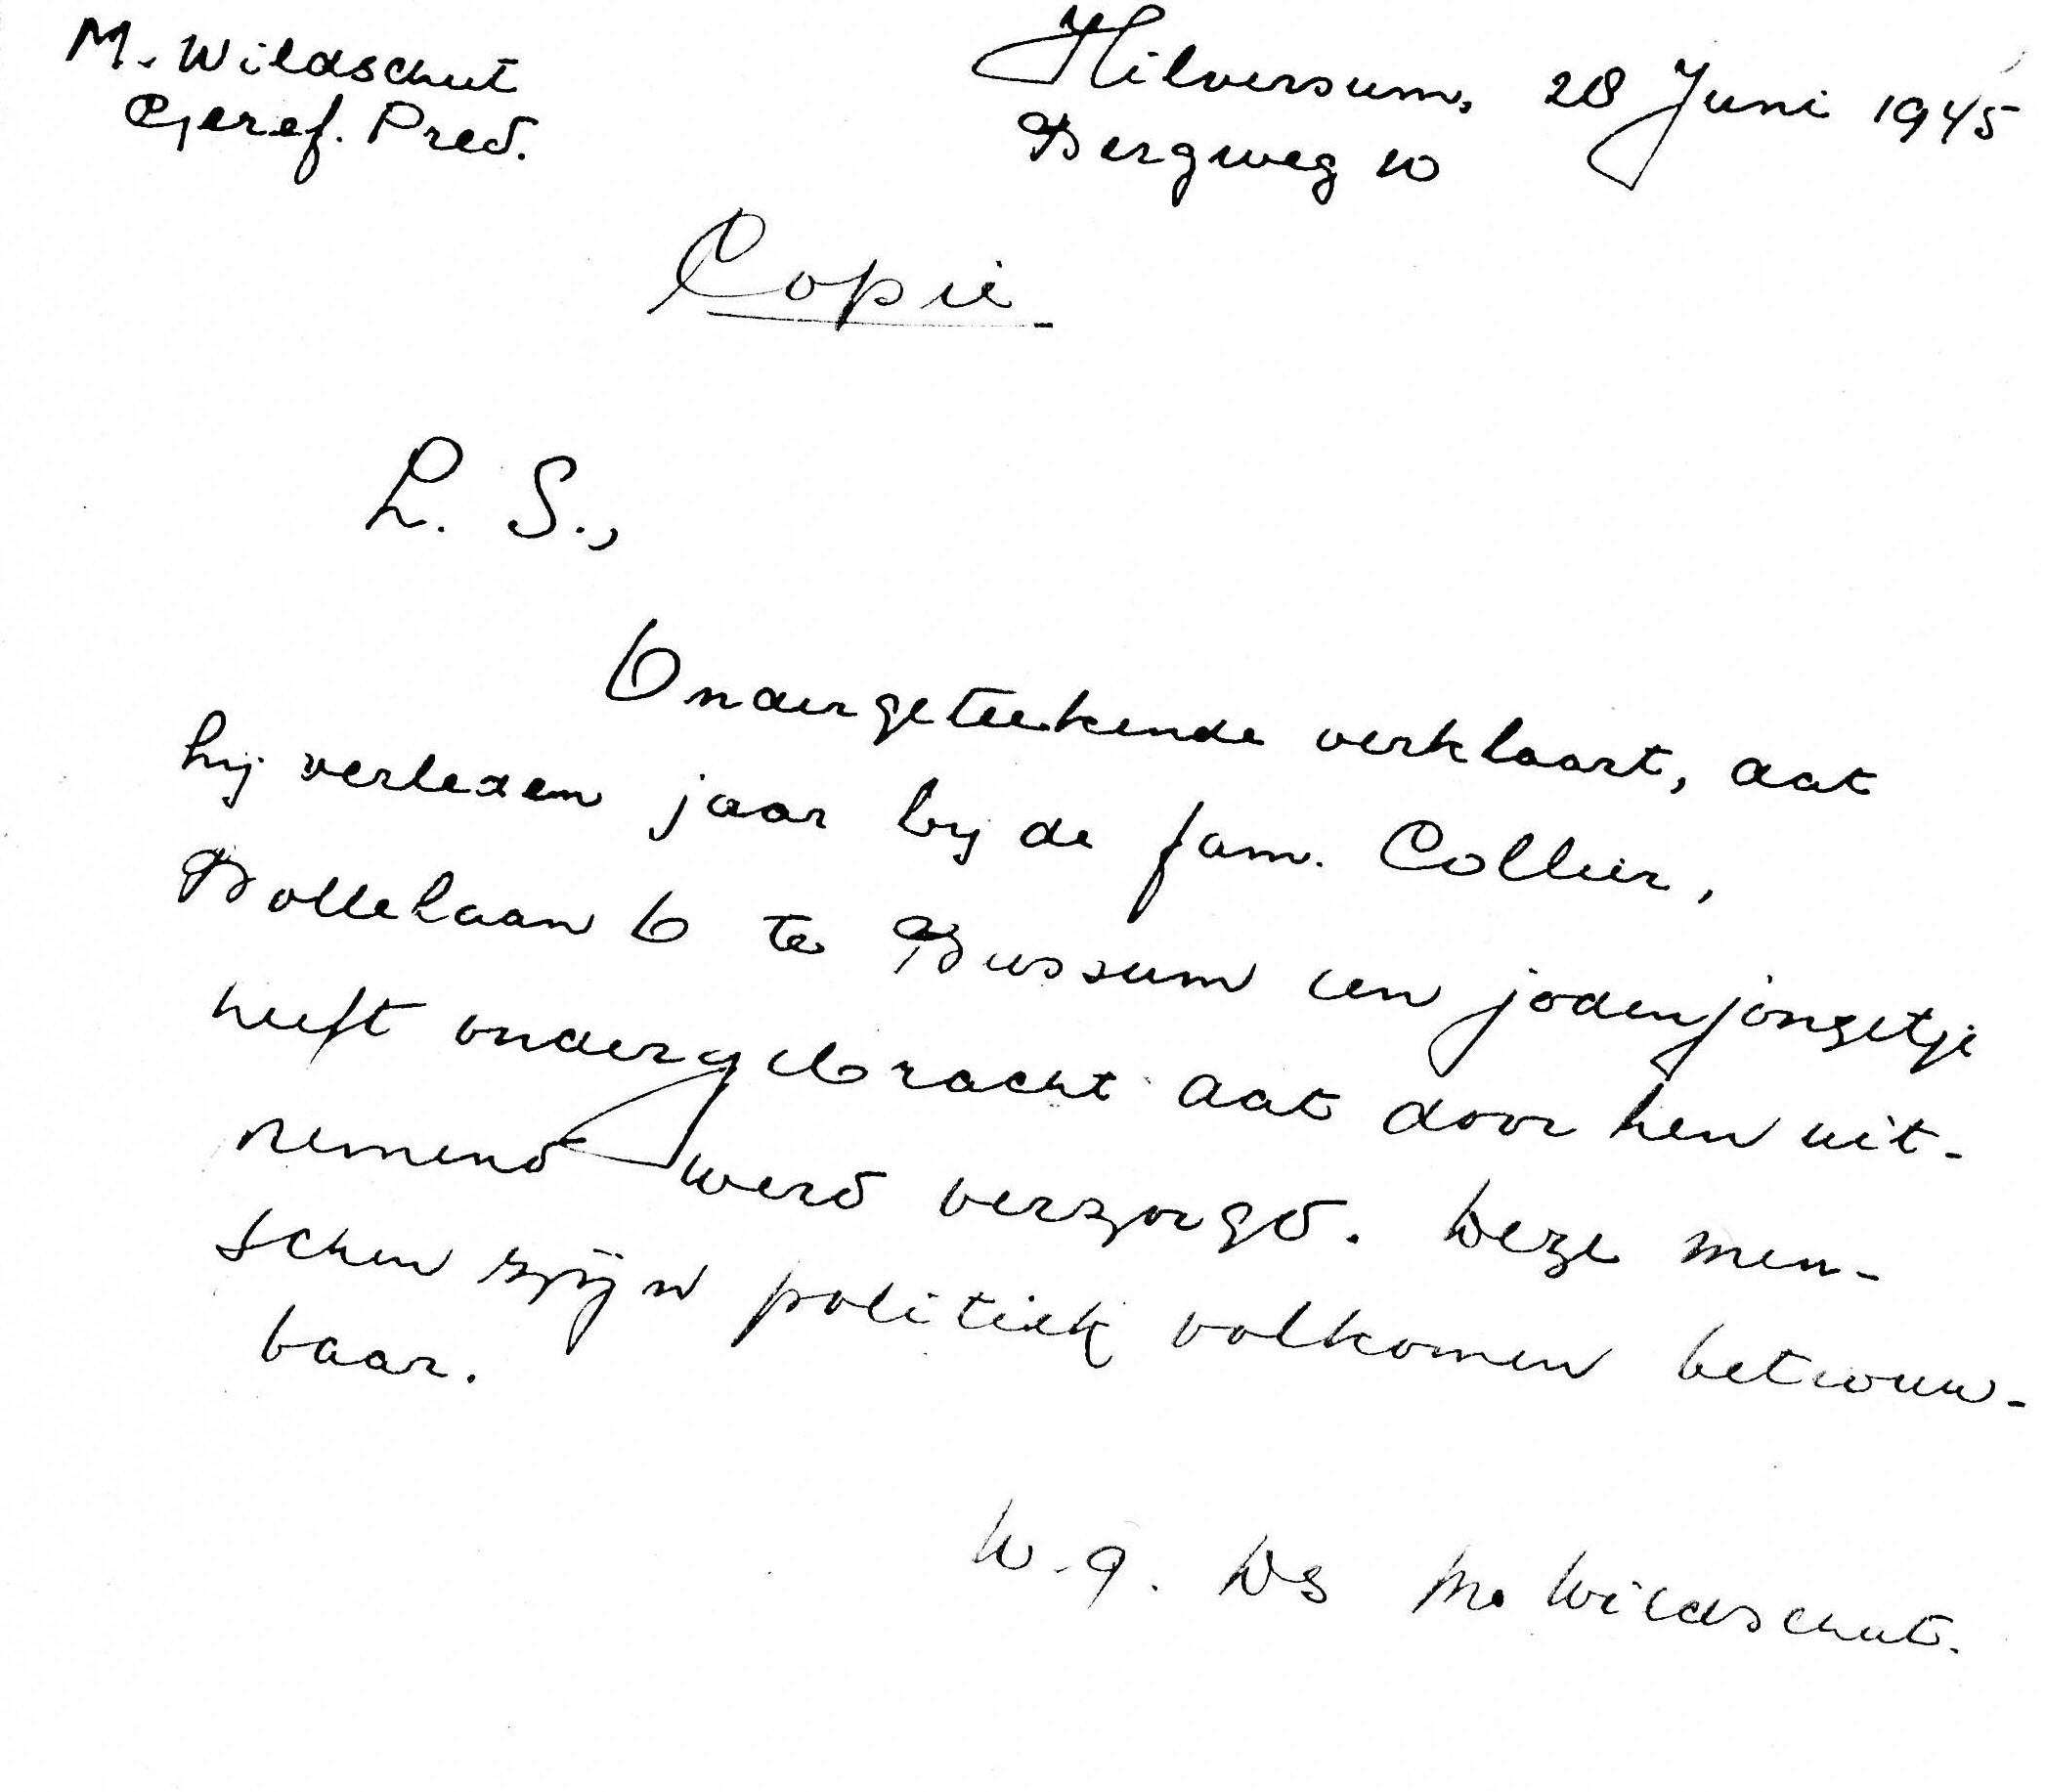 1945 letter by vicar a decharge about the imprisoned nazi Coljee and his German wife who helped Aunt Rosie during the war
